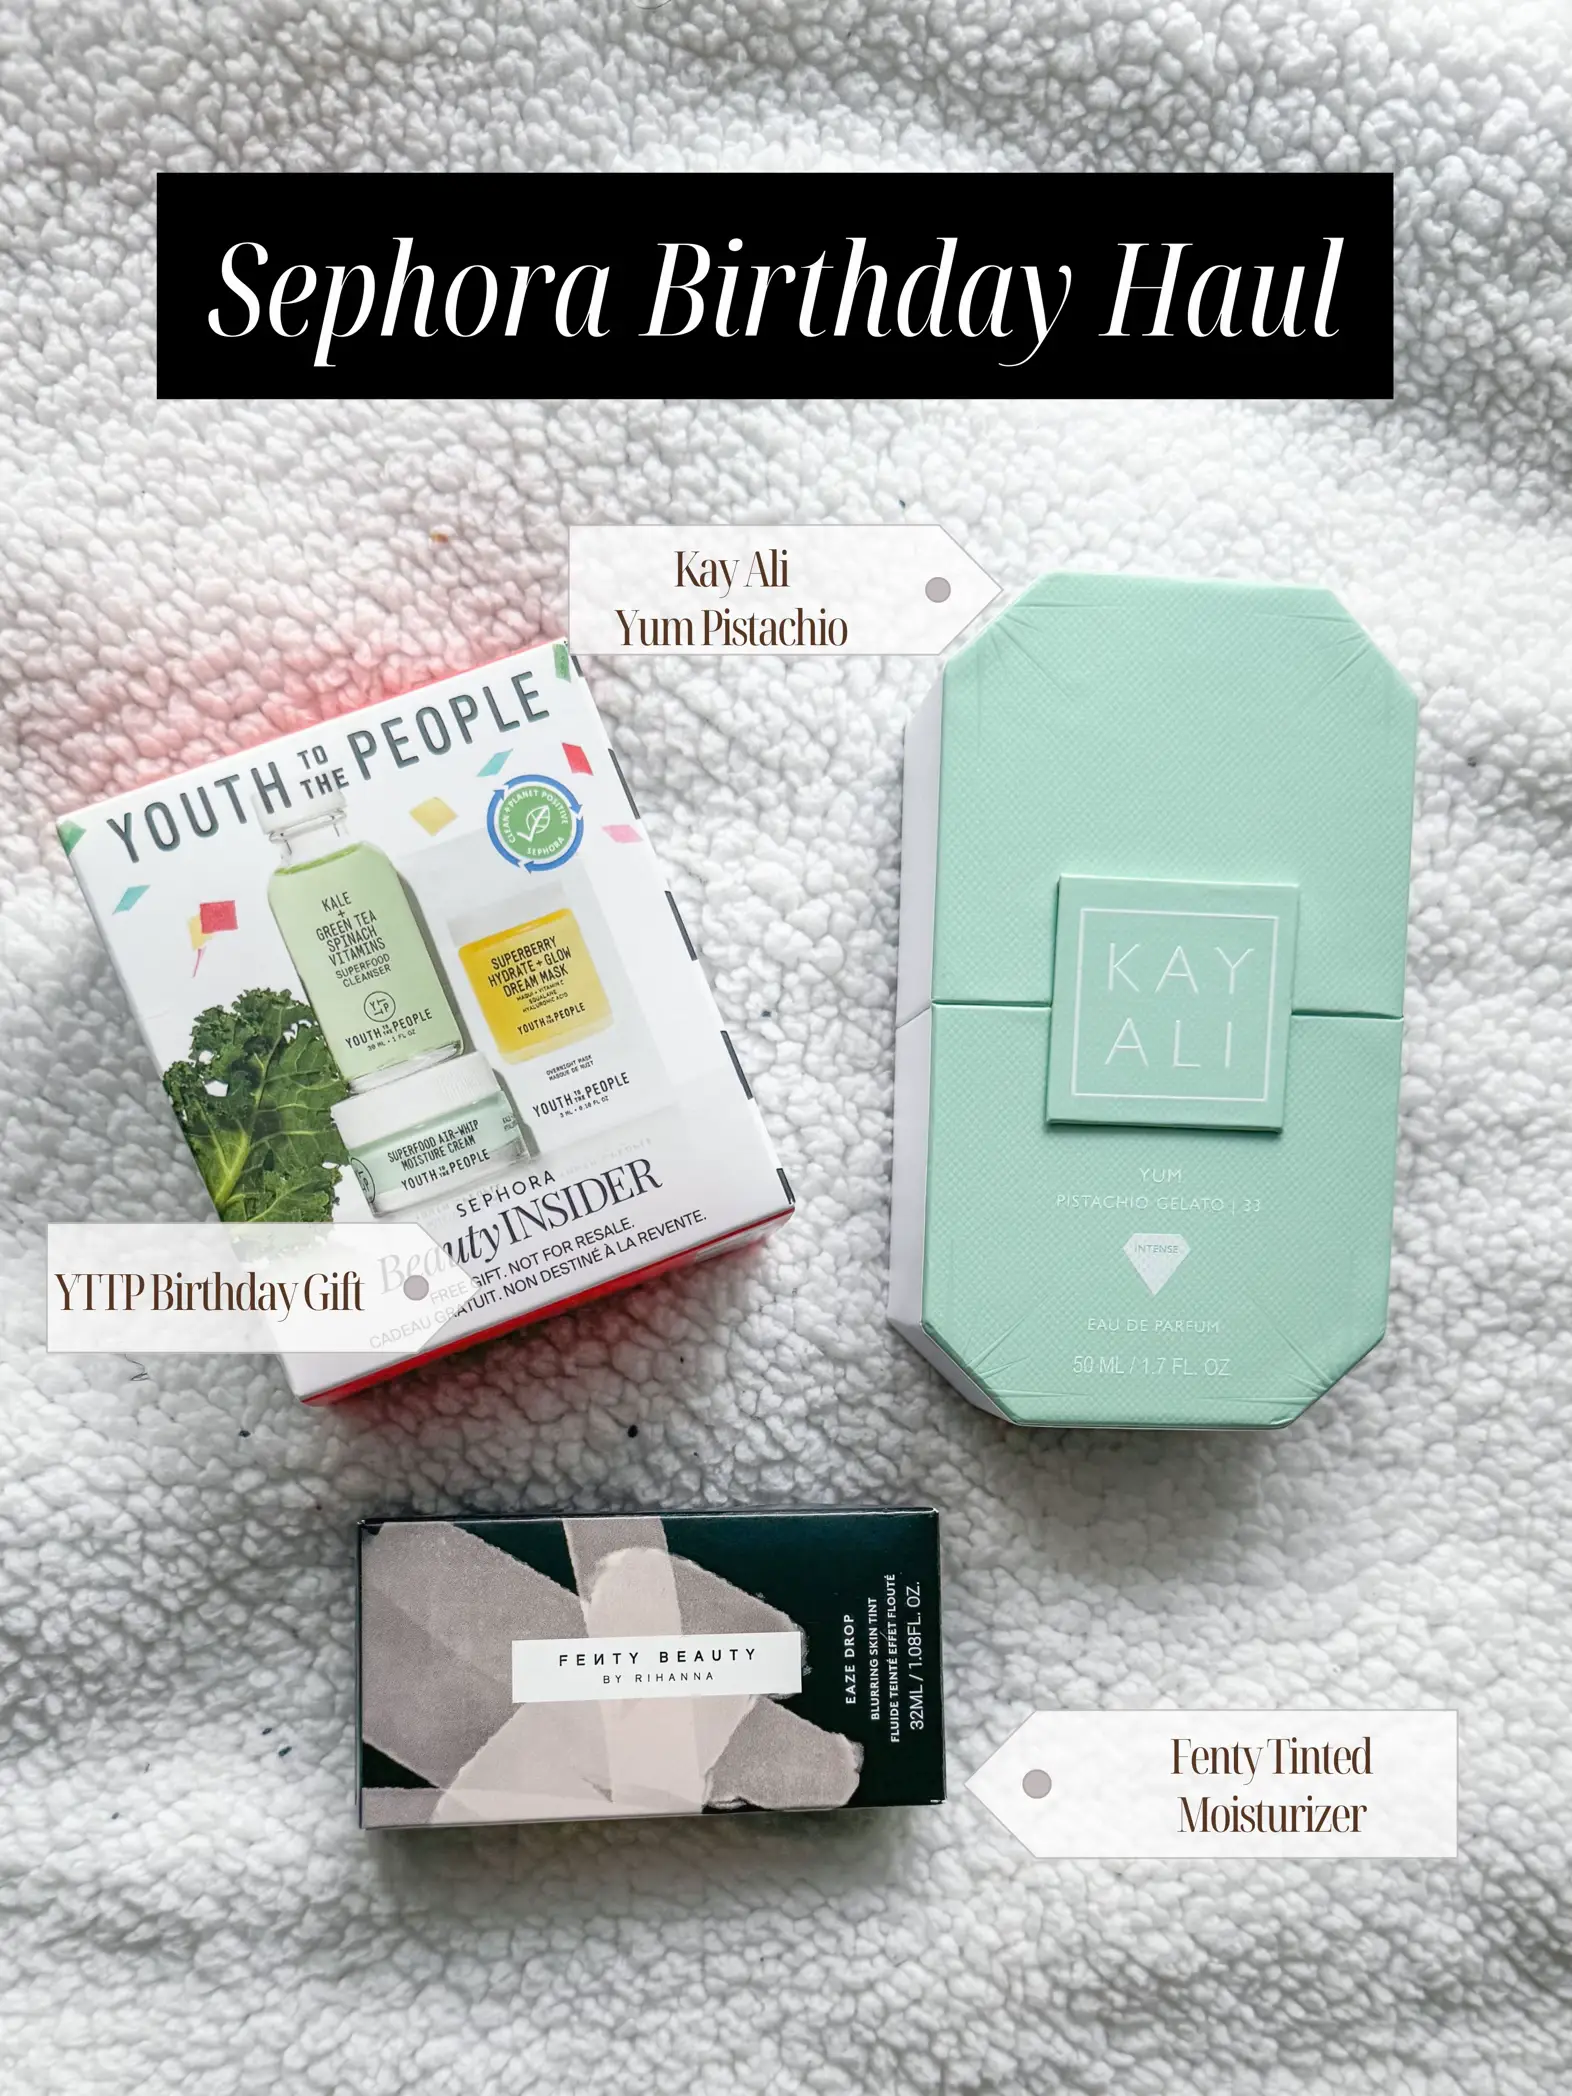 Sephora's 2024 Beauty Insider Birthday Gifts: Gucci, Tilbury and More